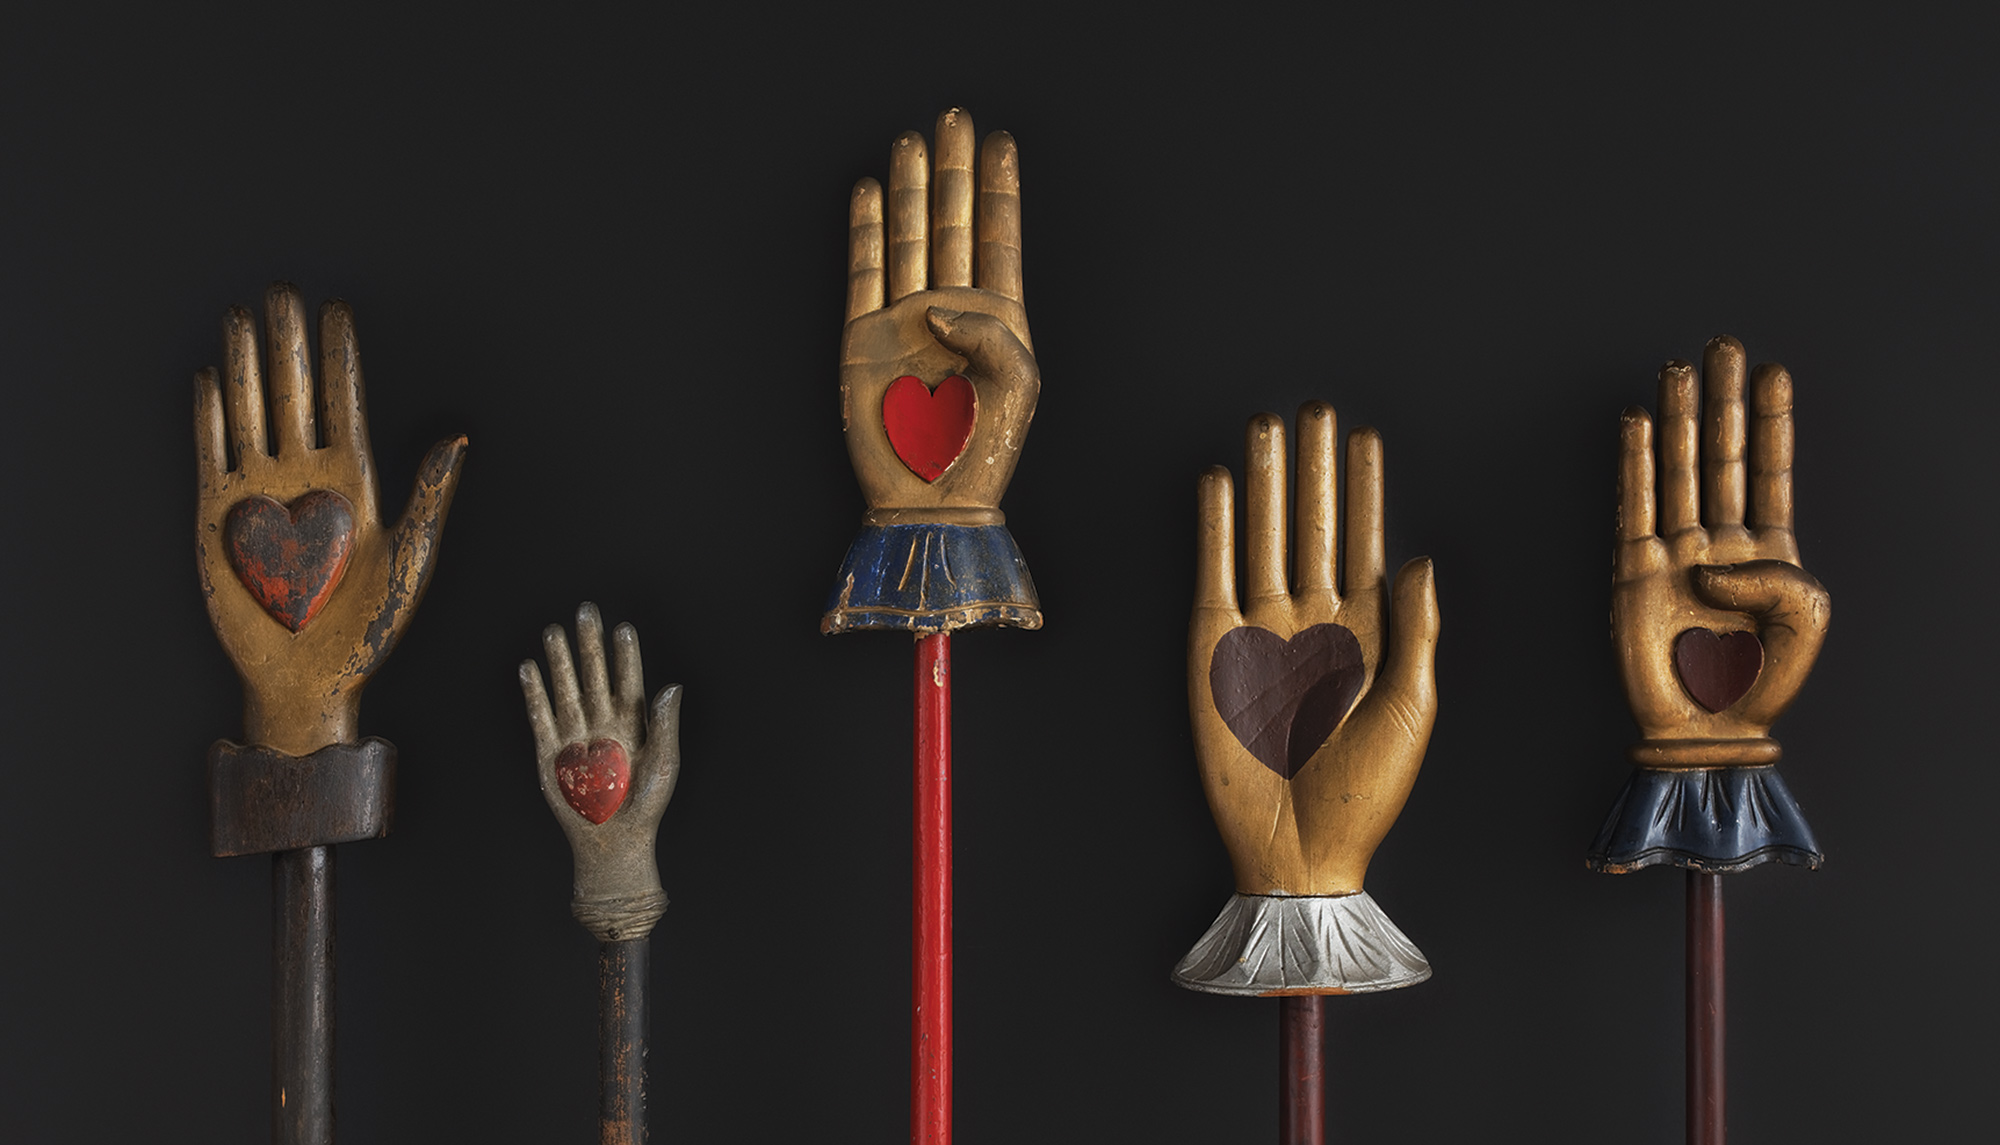 Image of hand carvings used in fraternal order rituals